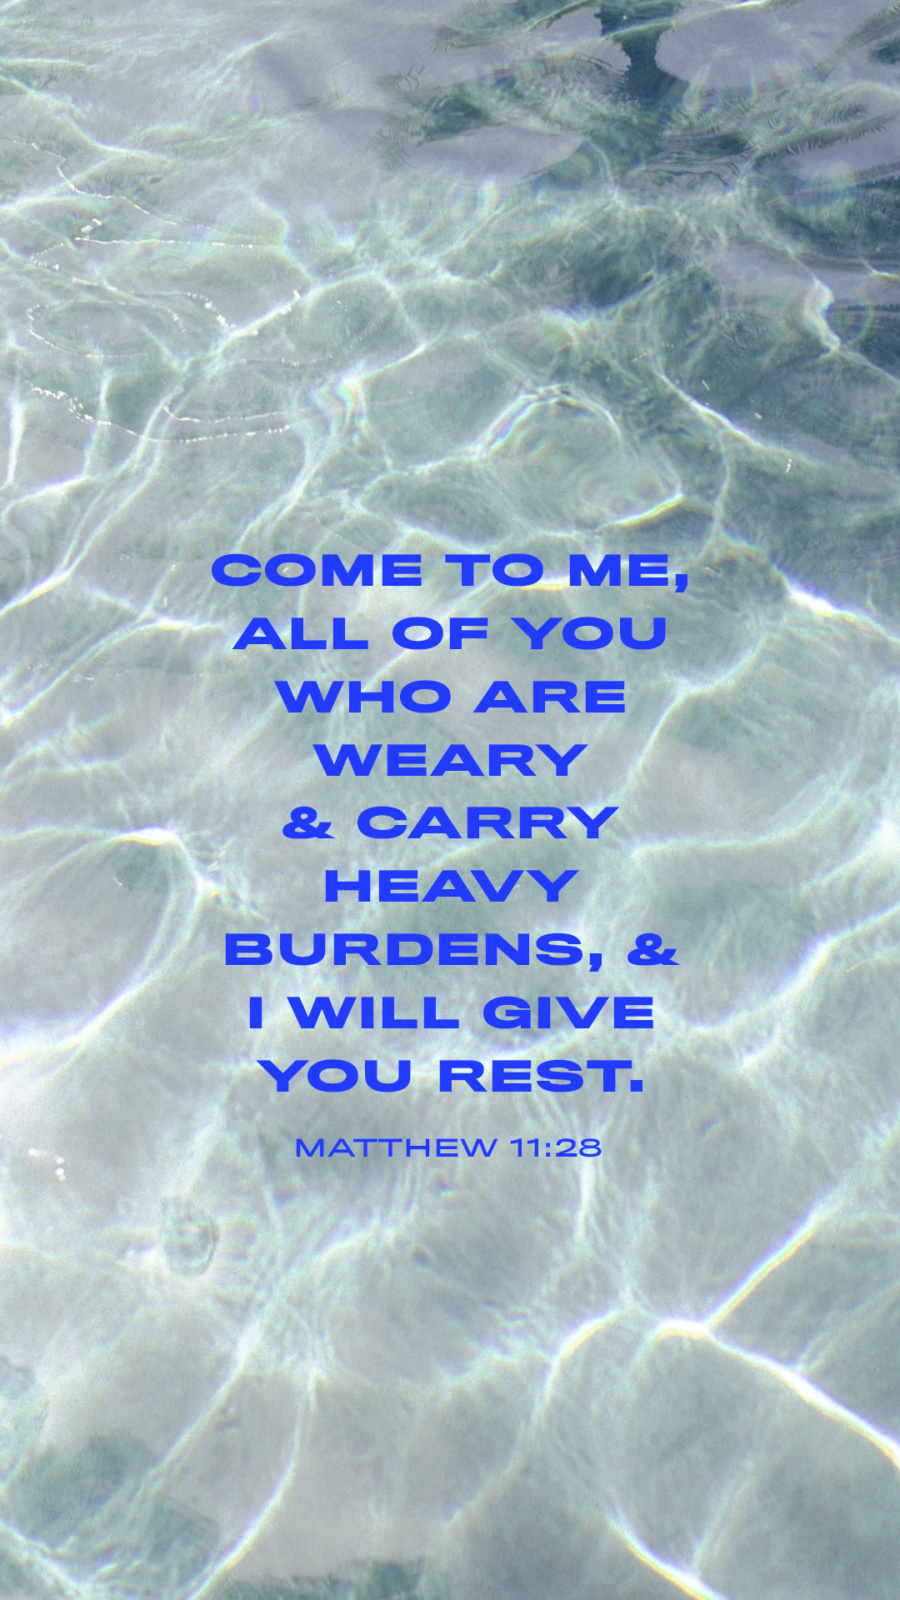 “Then Jesus said, ‘Come to me, all of you who are weary and carry heavy burdens, and I will give you rest.’” (Matthew 11:28)